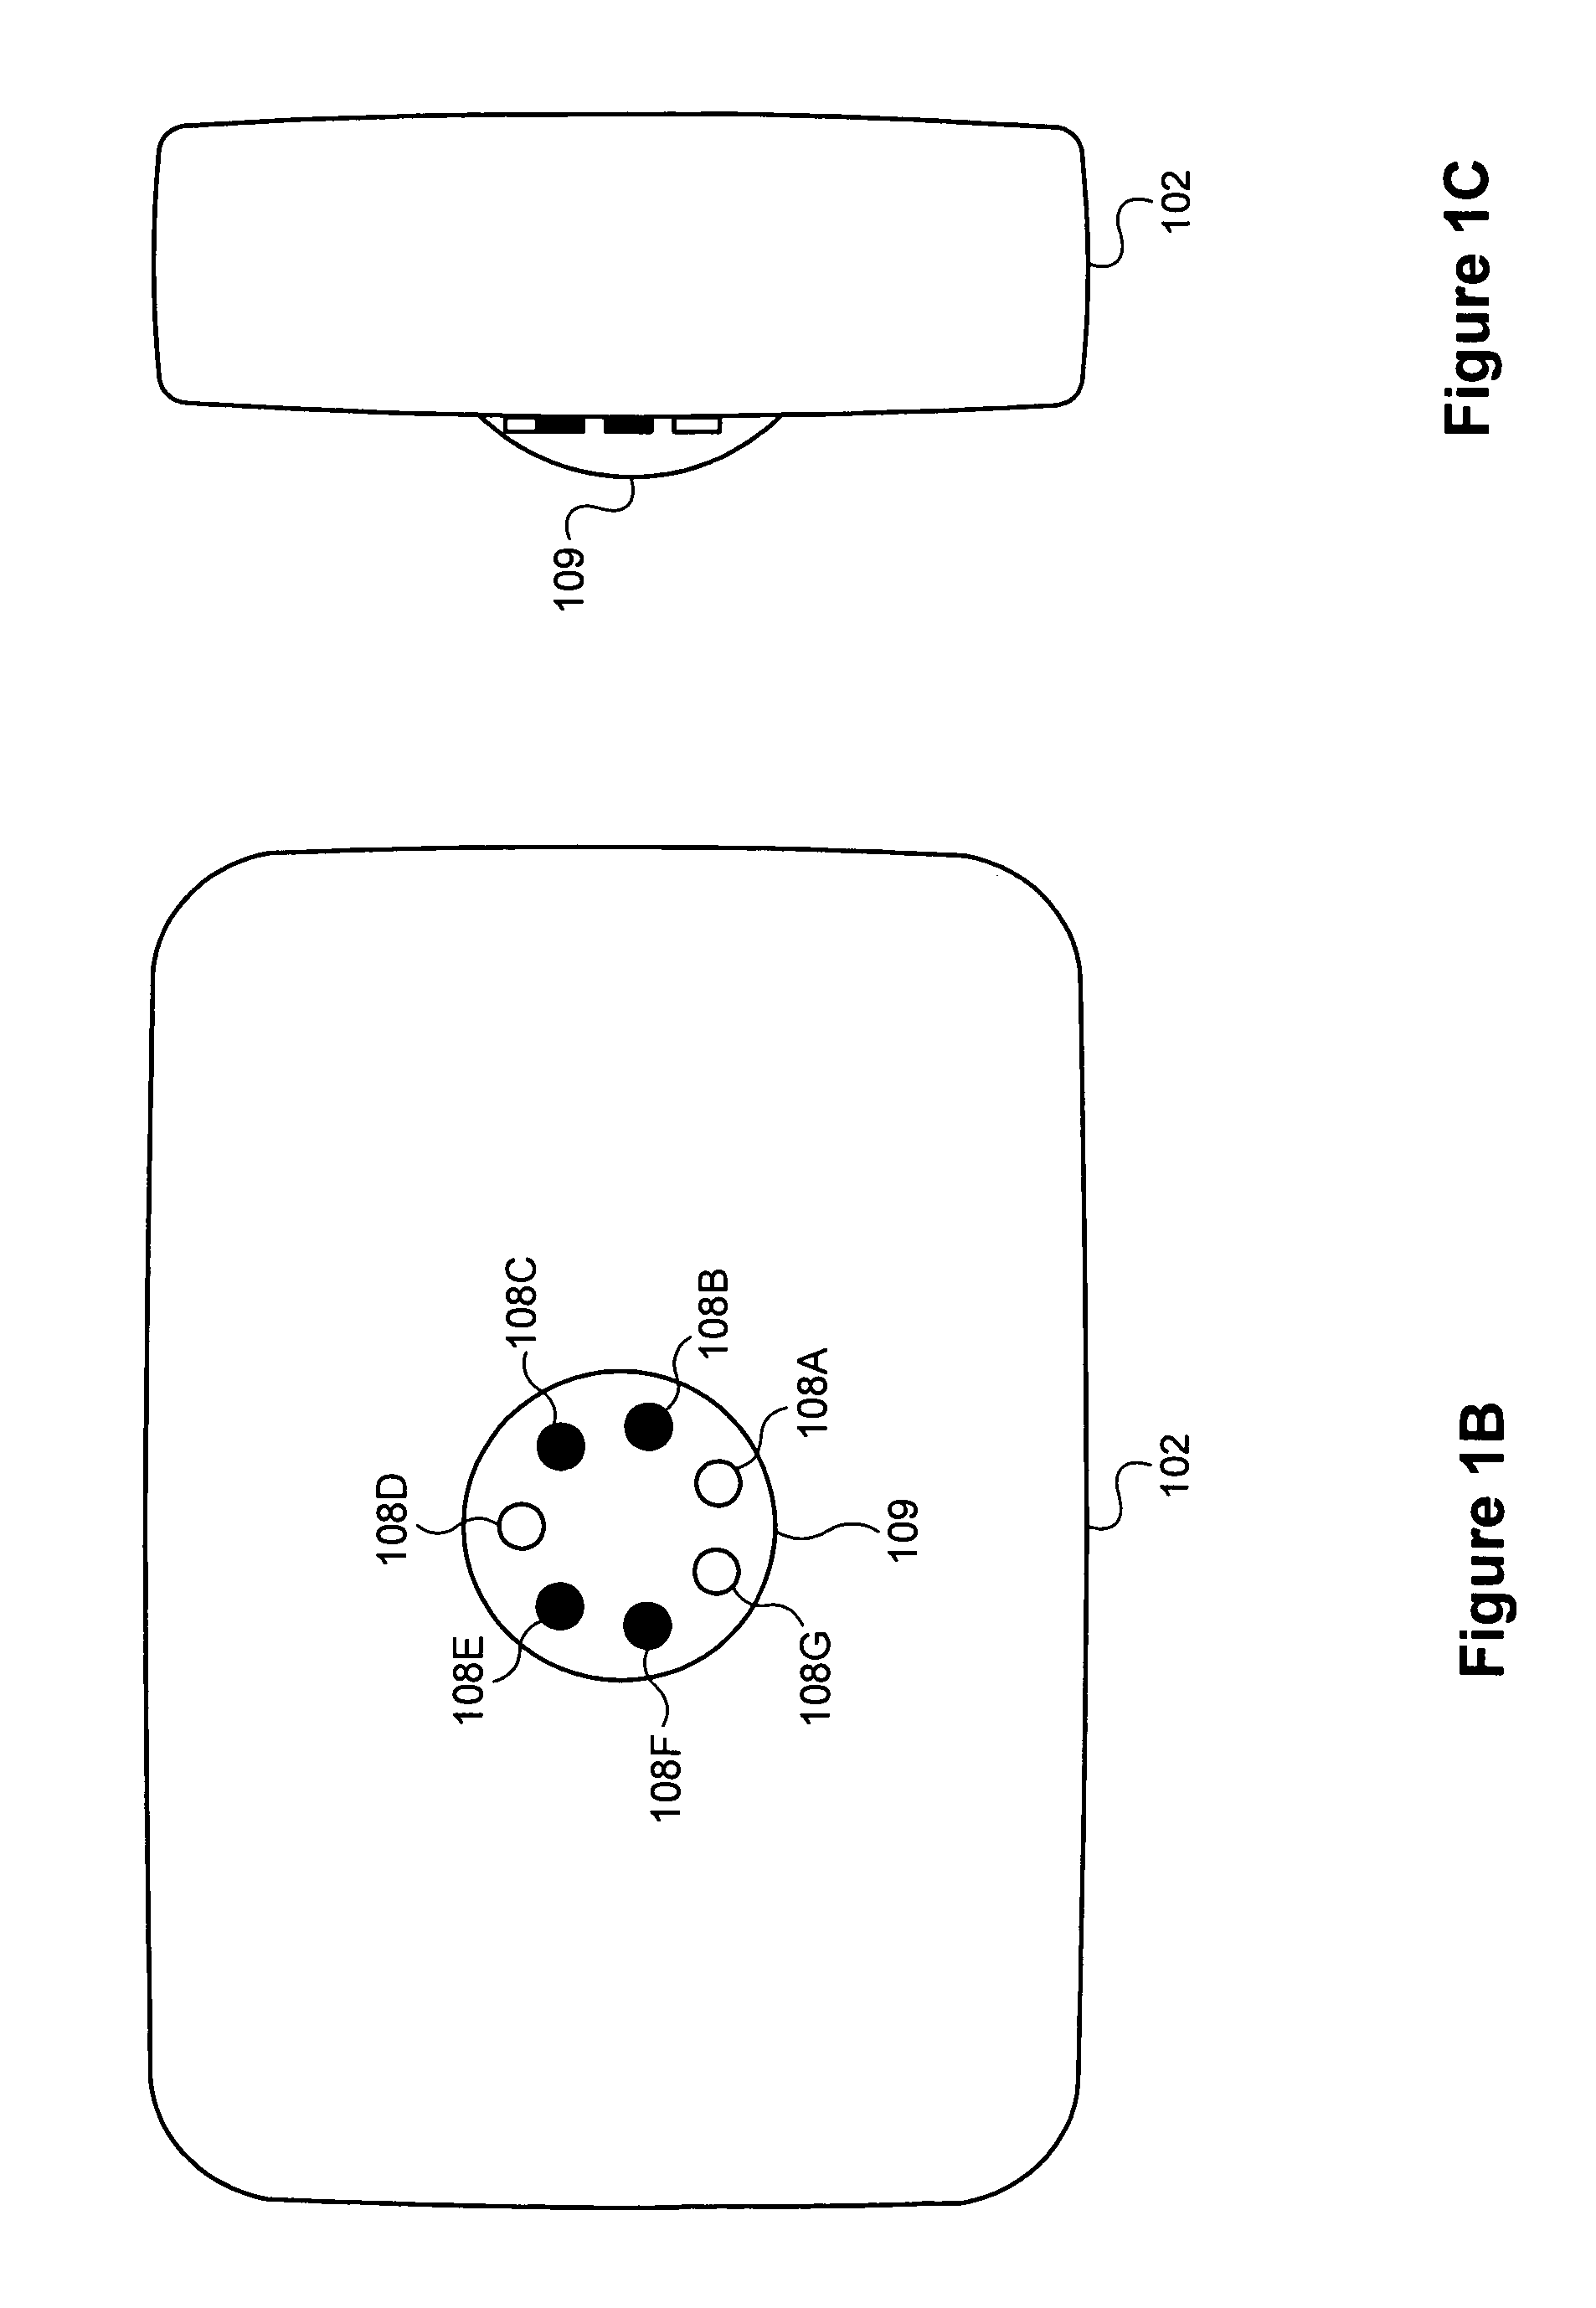 Peripheral device with visual indicators to show utilization of radio component